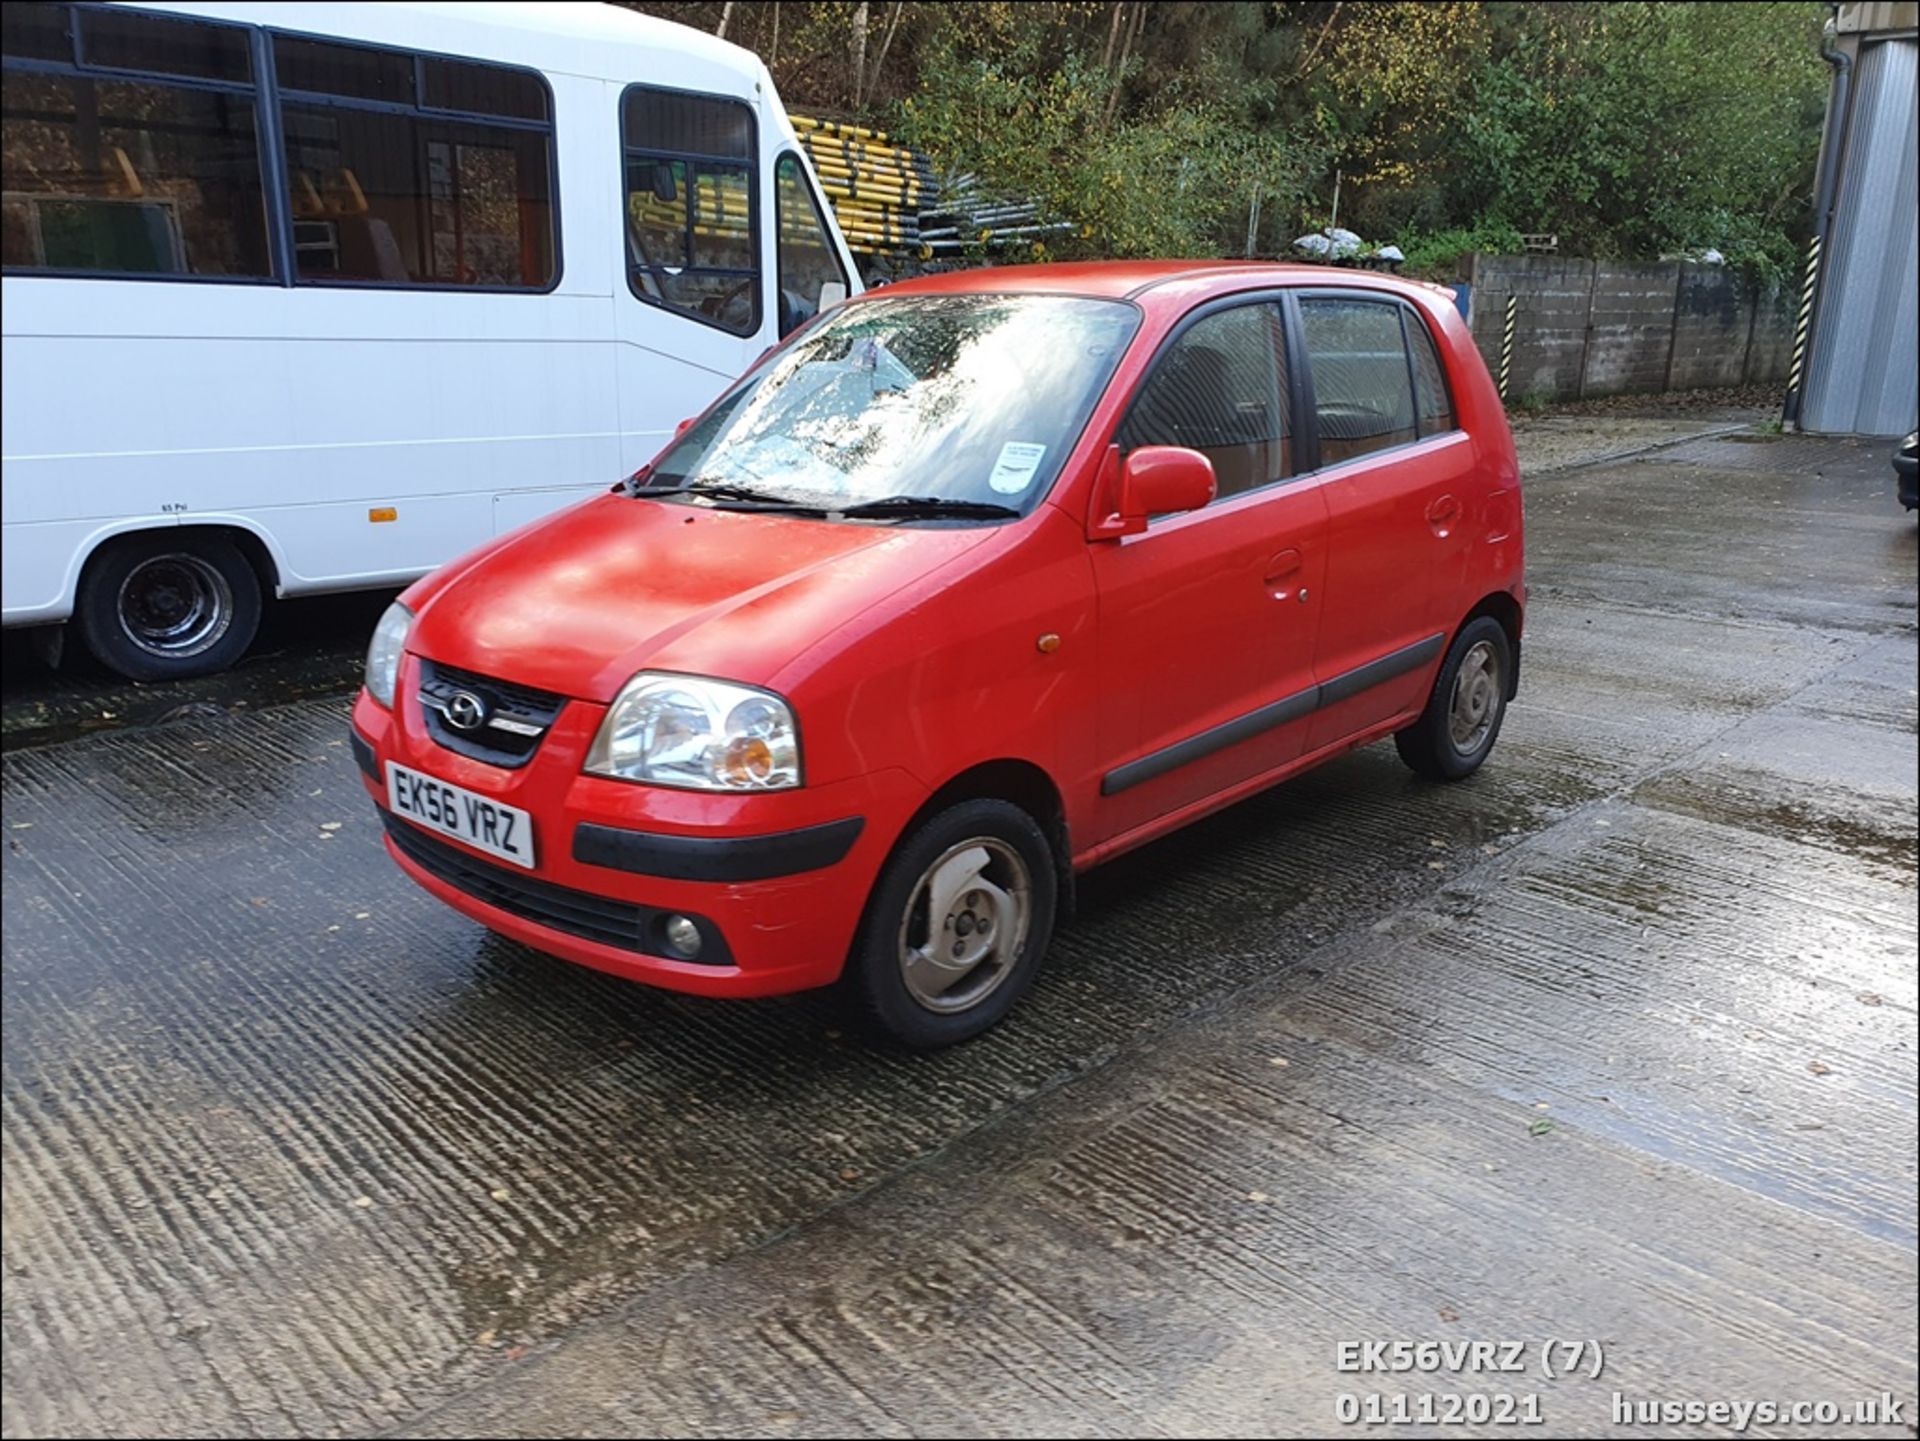 06/56 HYUNDAI AMICA CDX - 1086cc 5dr Hatchback (Red, 60k) - Image 7 of 18